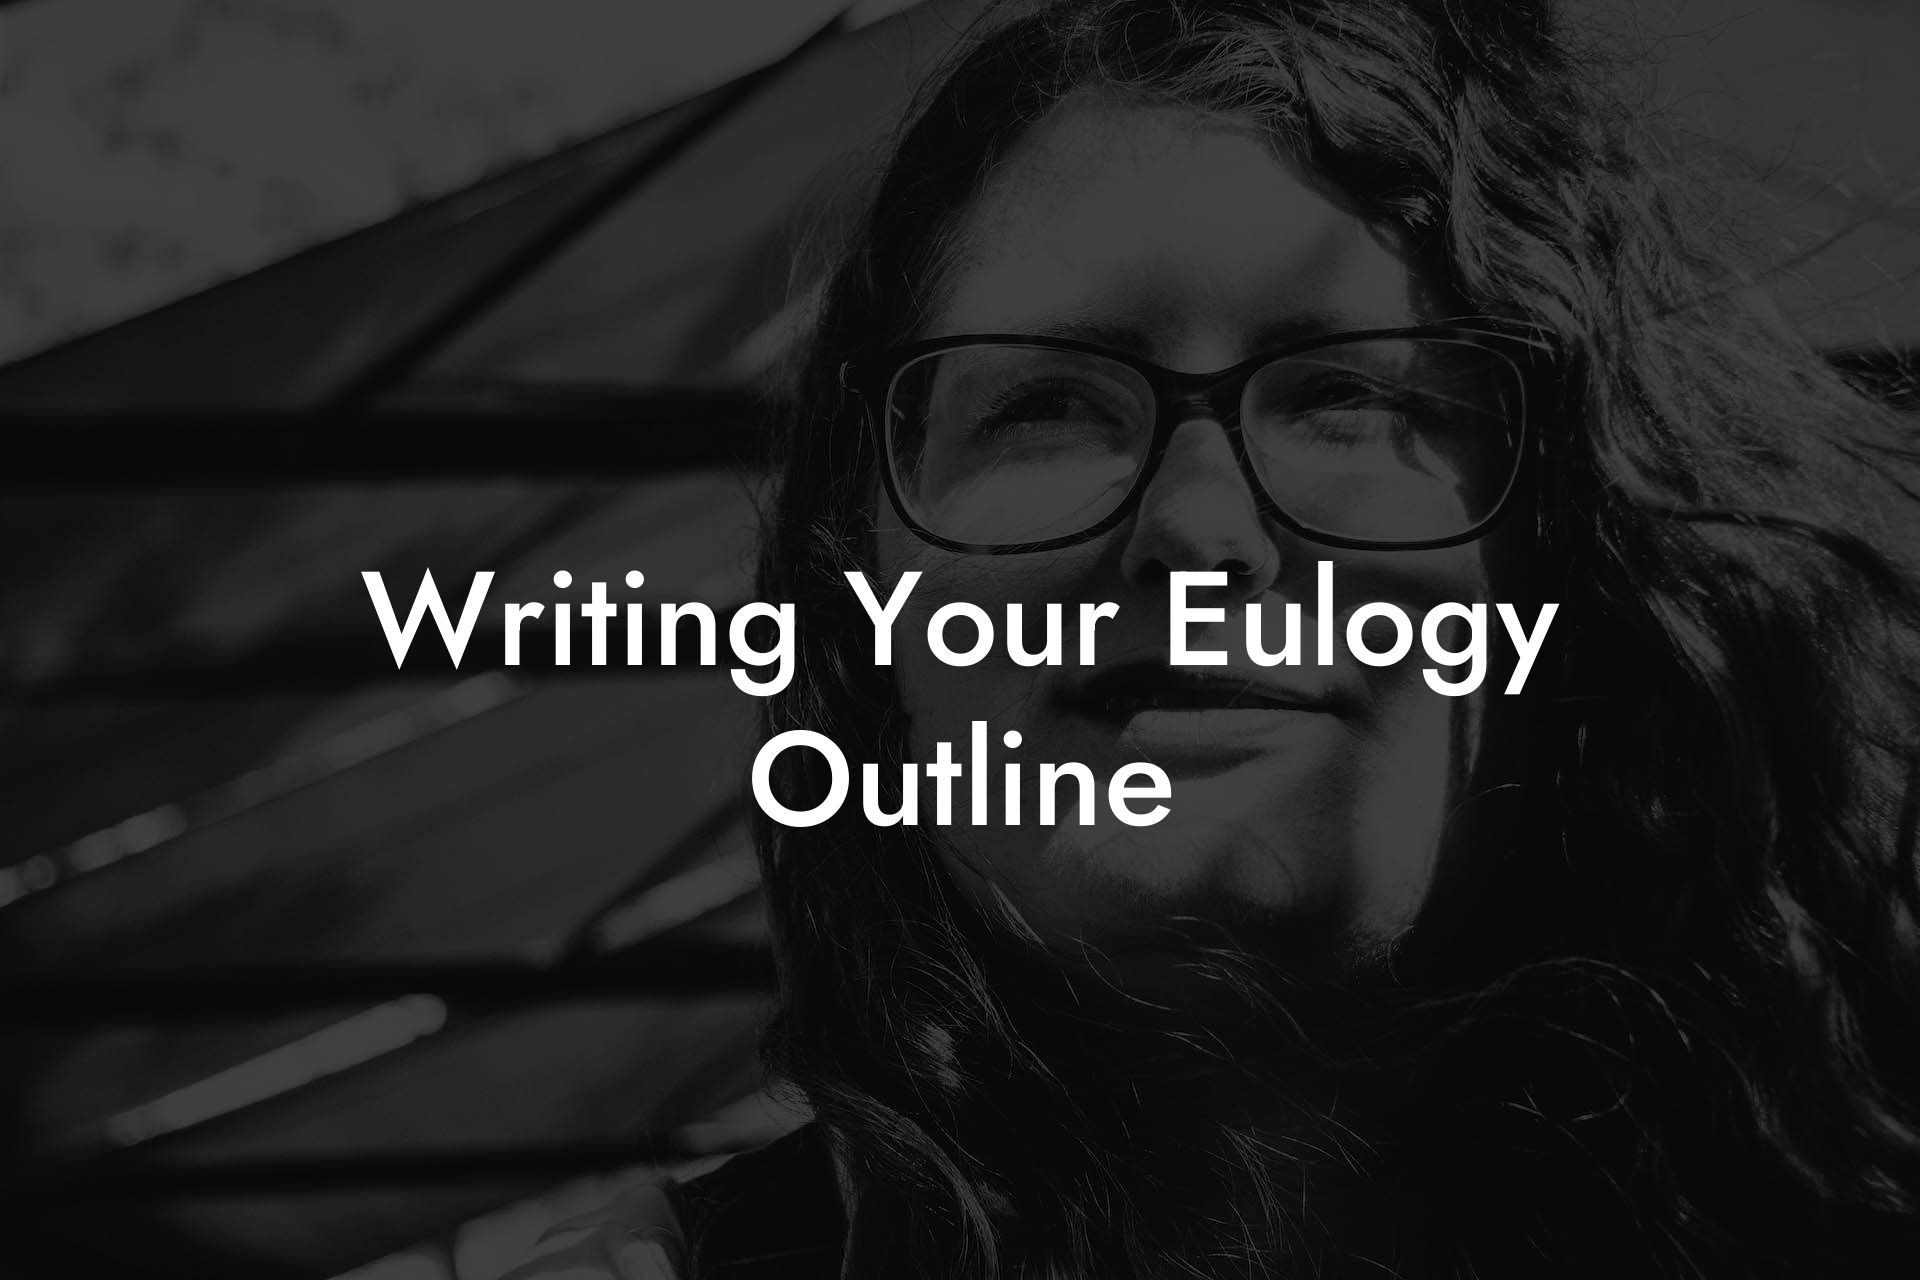 Writing Your Eulogy Outline